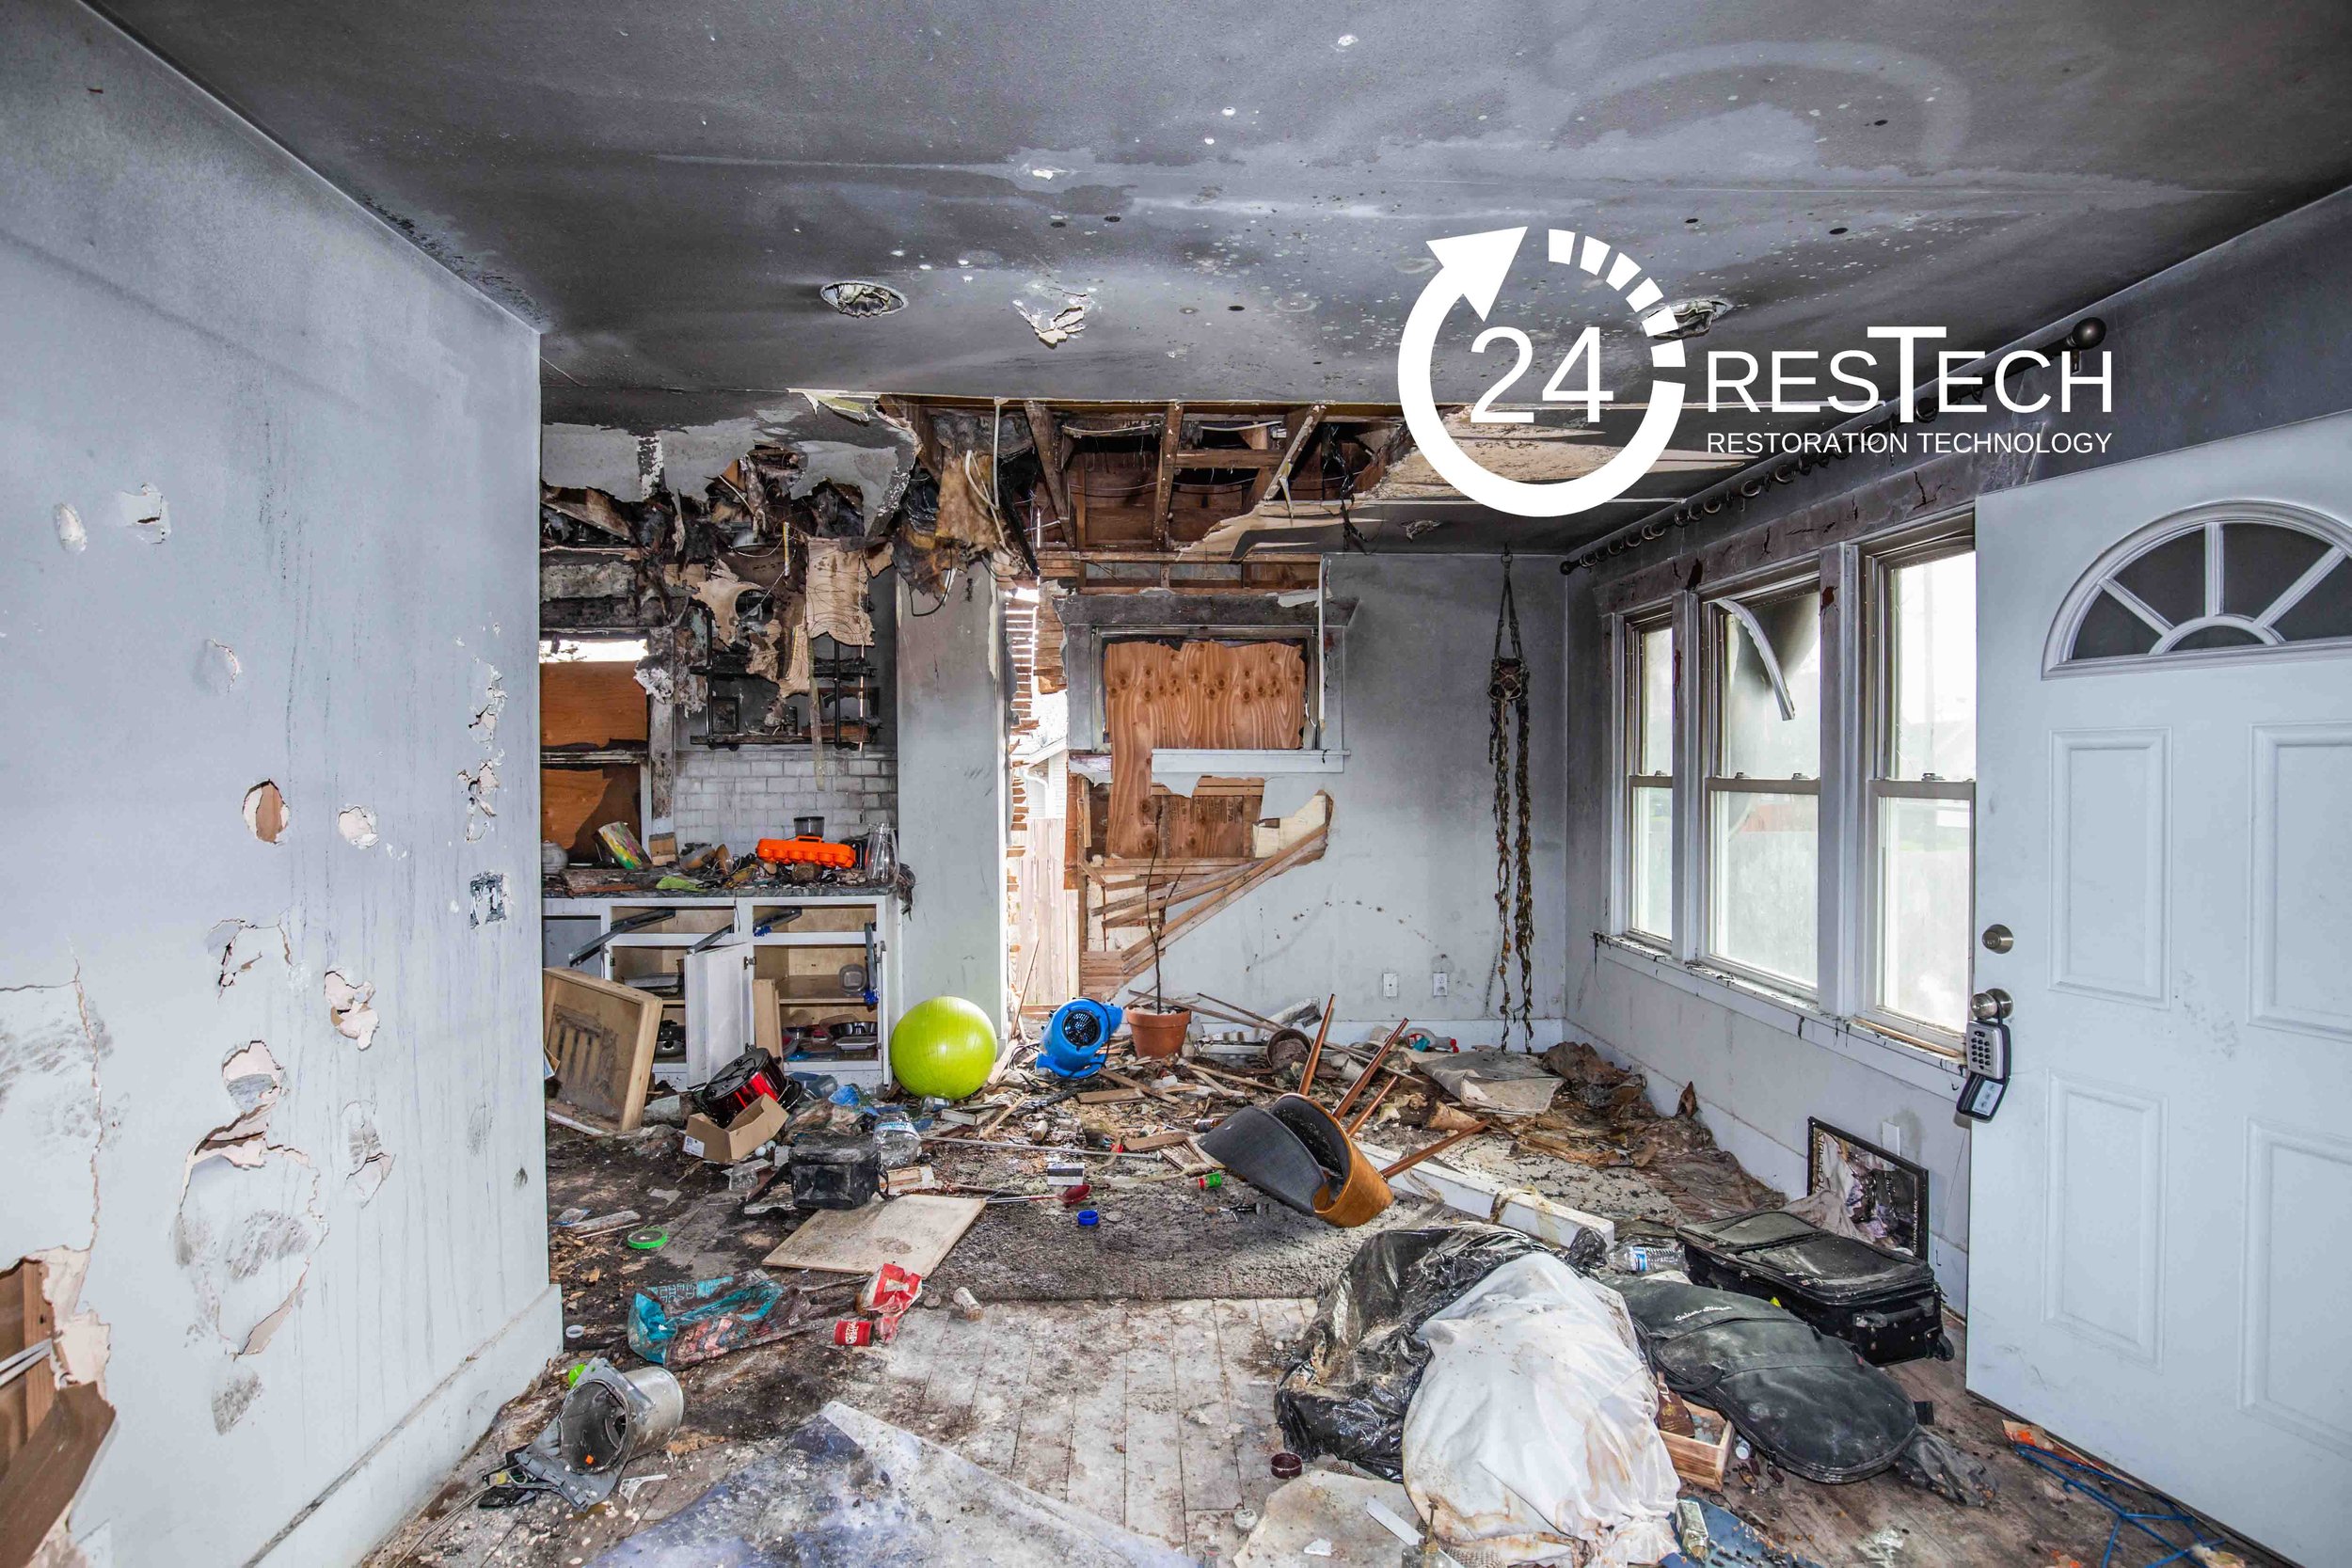 24ResTech's Fire Damage Restoration Project - Living Room Restoration, Smoke Clean-Up and Removal